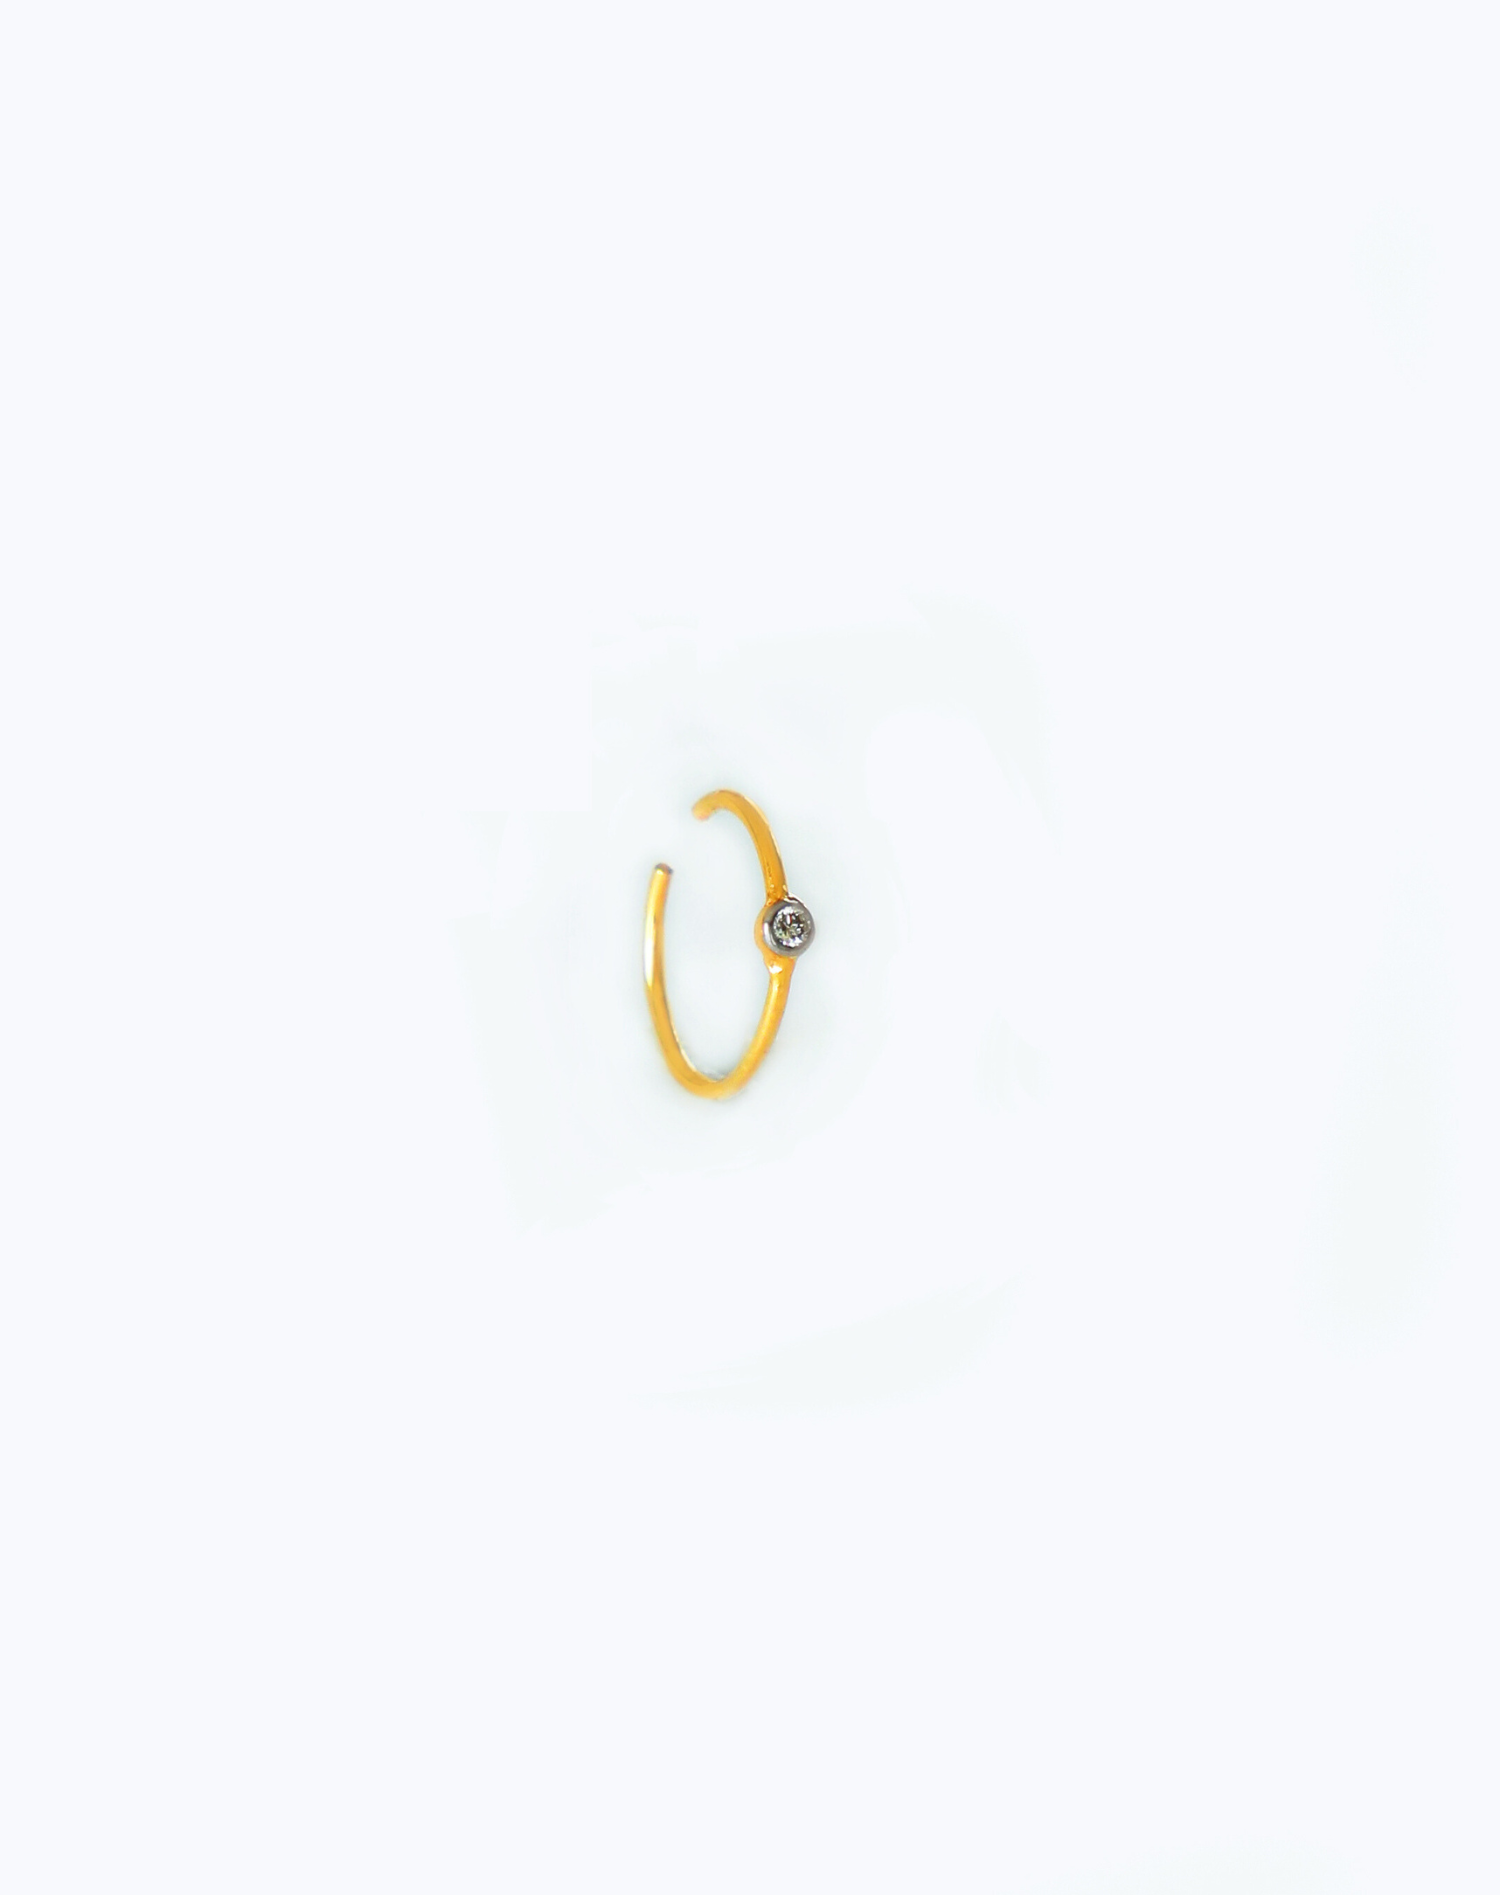 Buy Diamonds,14k Yellow Gold Multistone Nose Ring Hoop Stud..20g..7mm  Online in India - Etsy